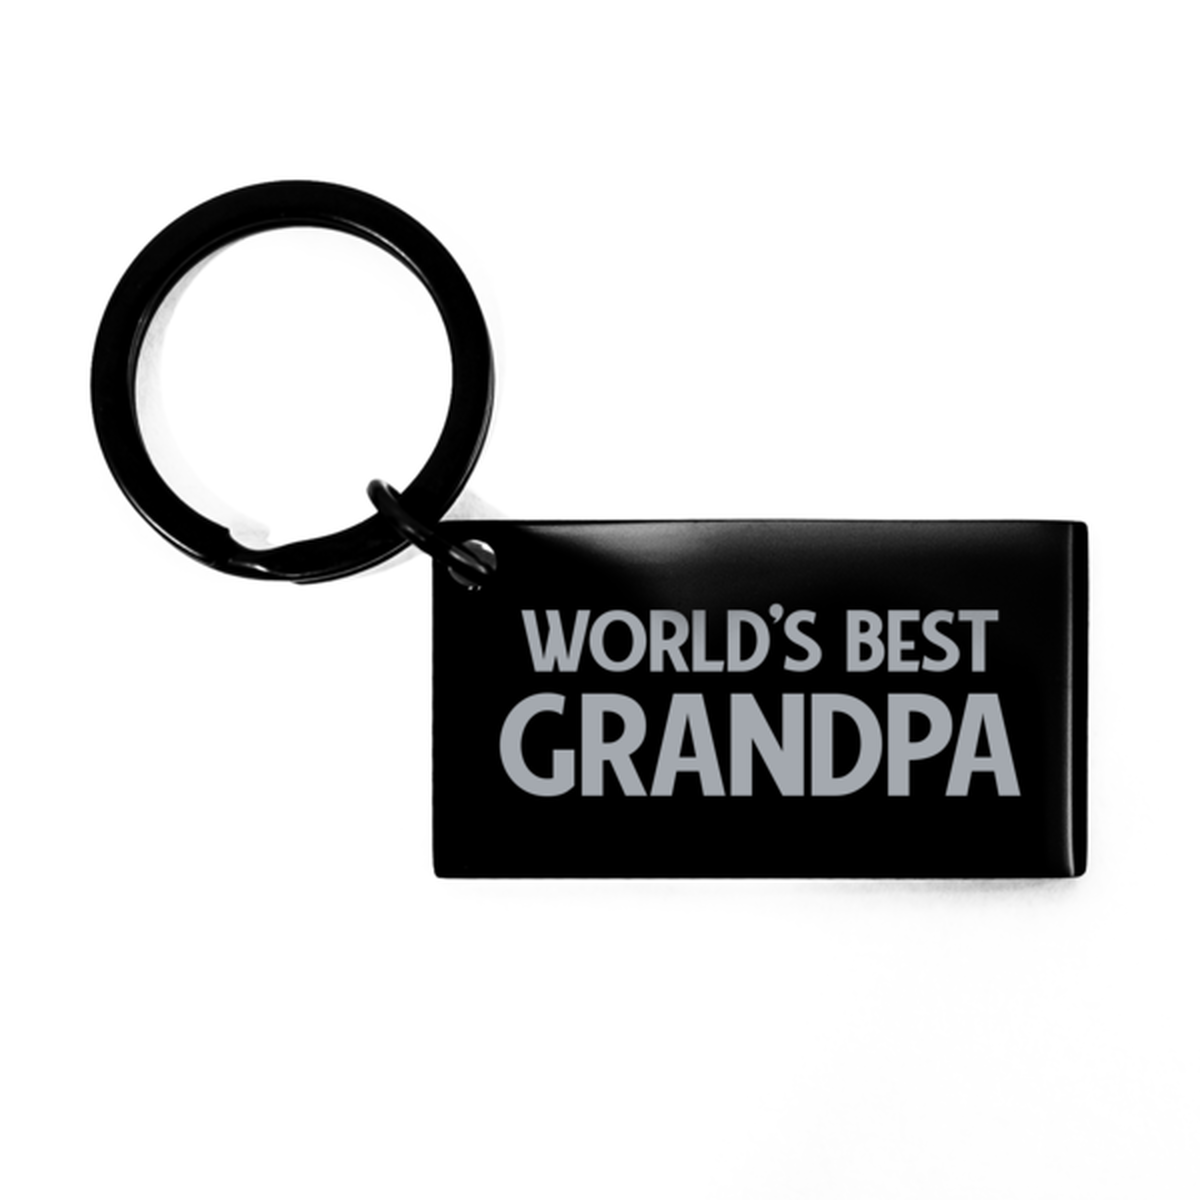 Worlds Best Grandpa Gifts, Funny Black Engraved Keychain For Grandpa, Birthday Presents For Men